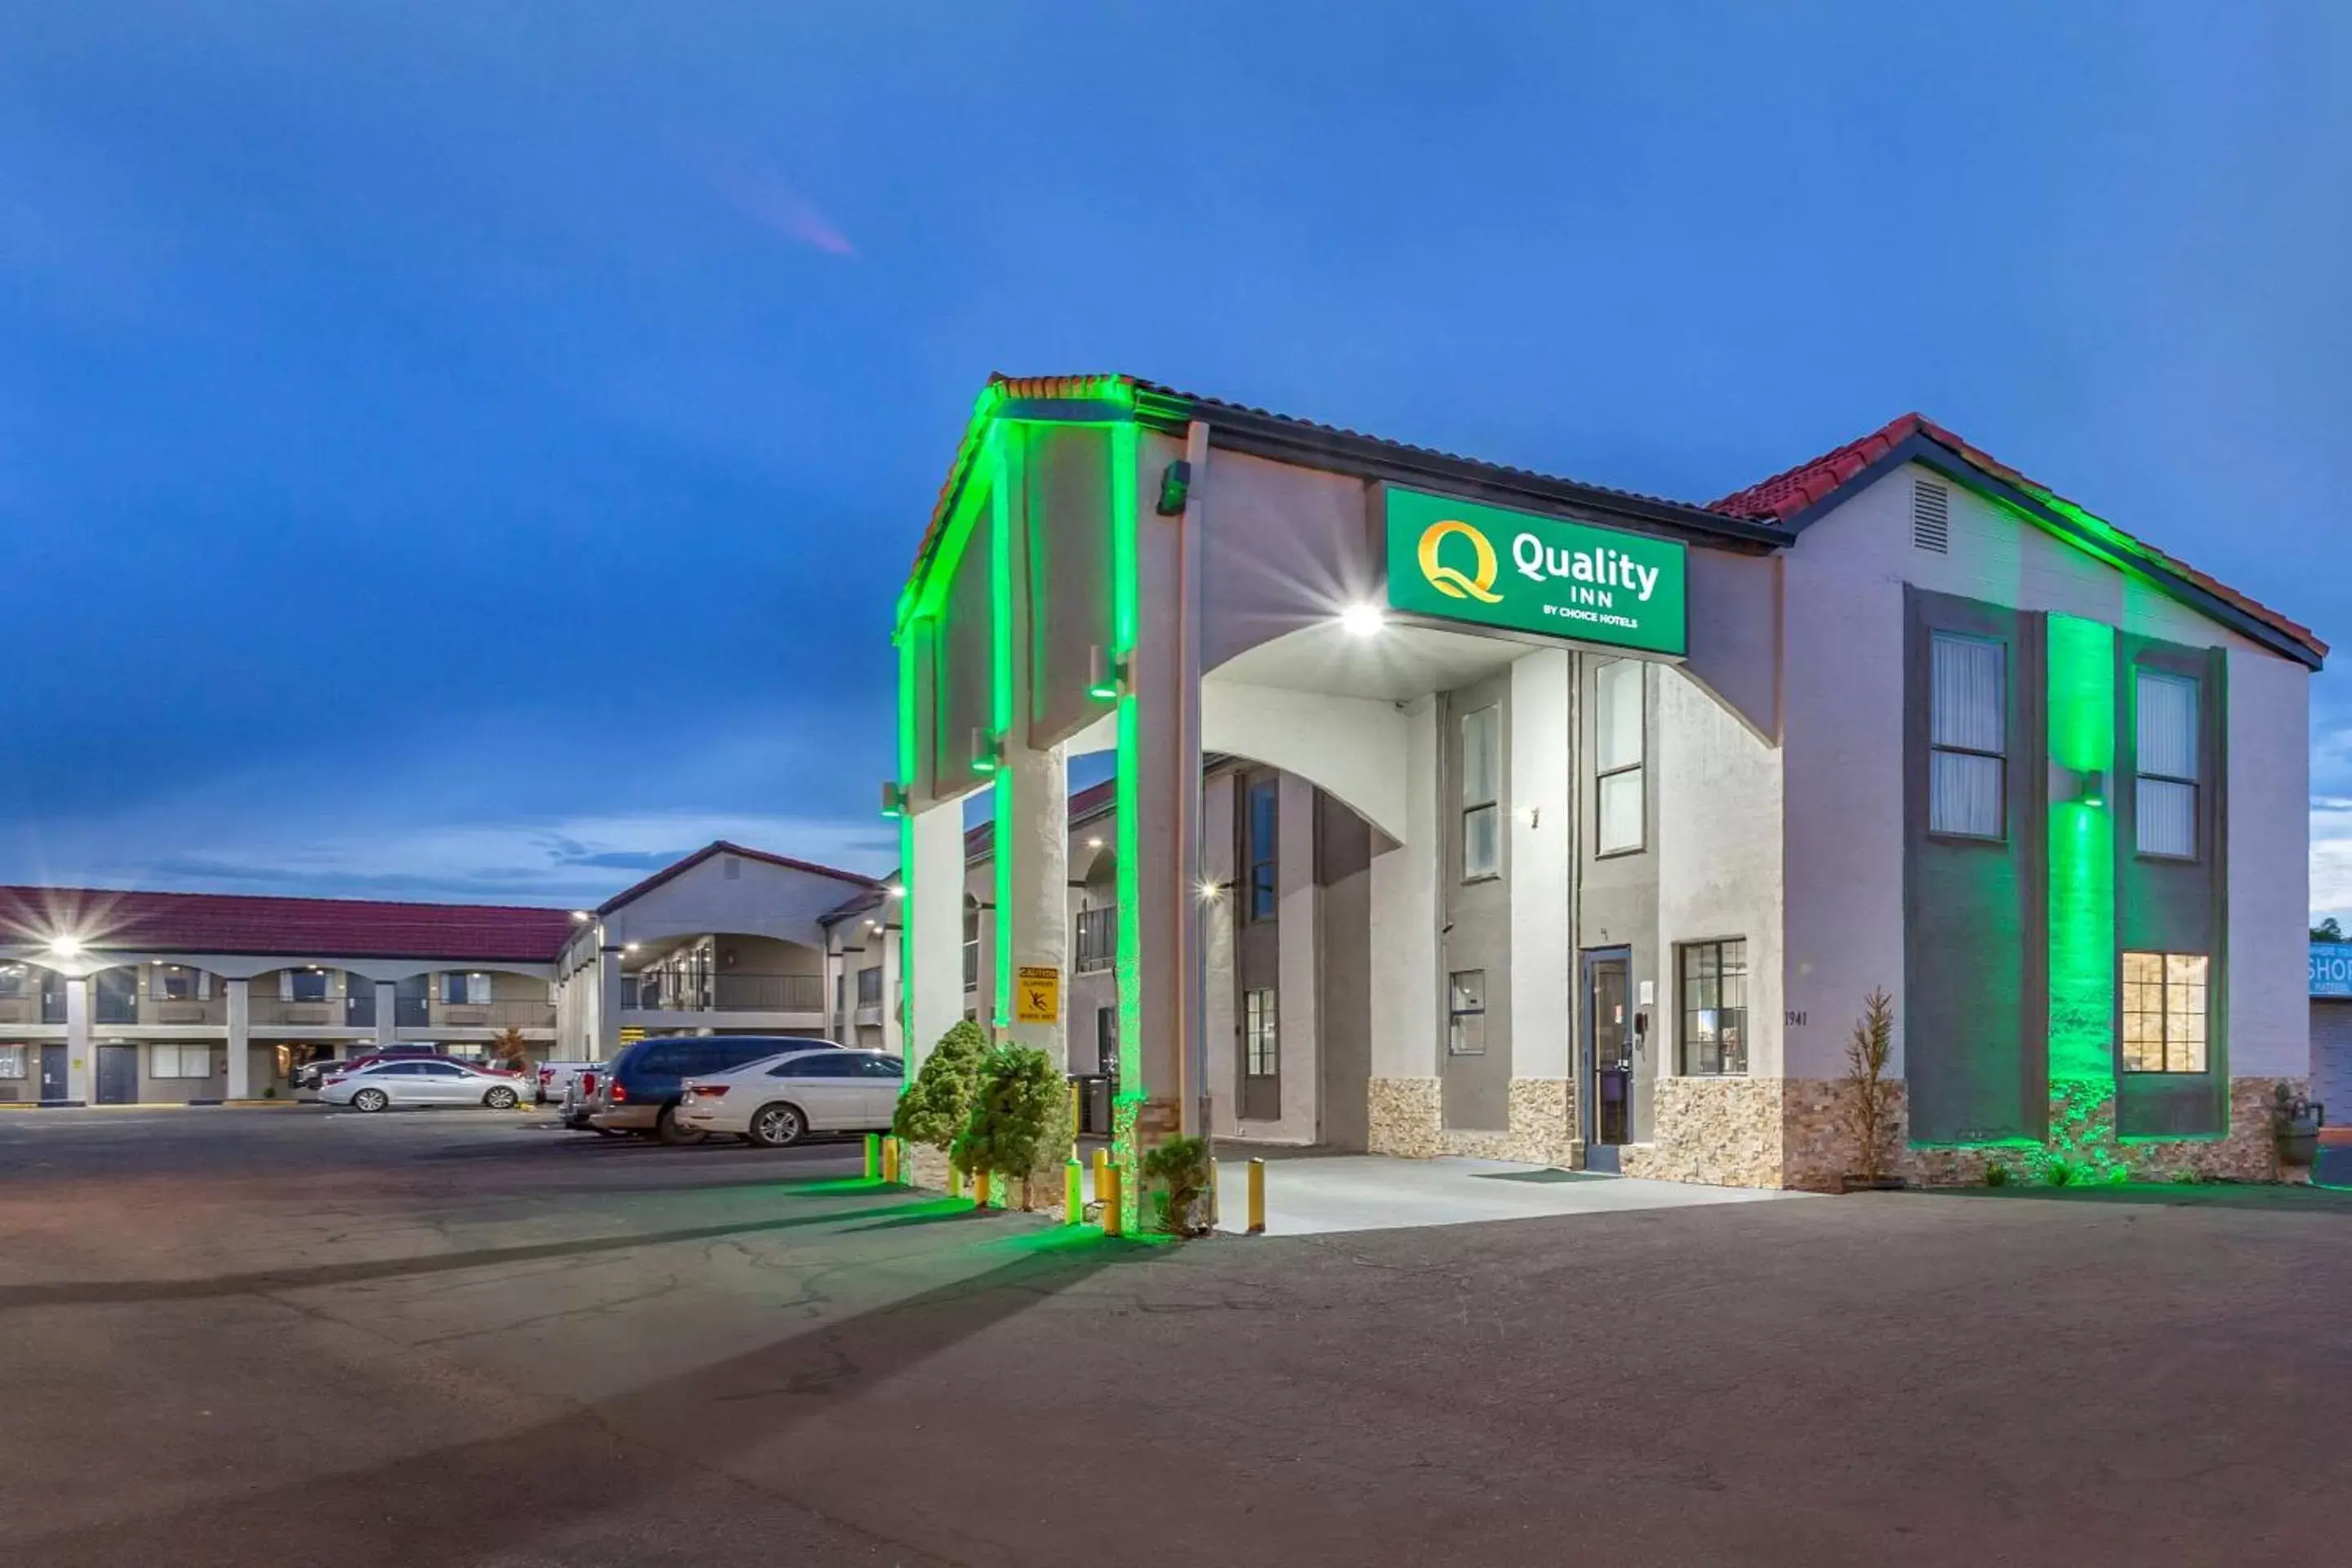 Property building in Quality Inn Show Low